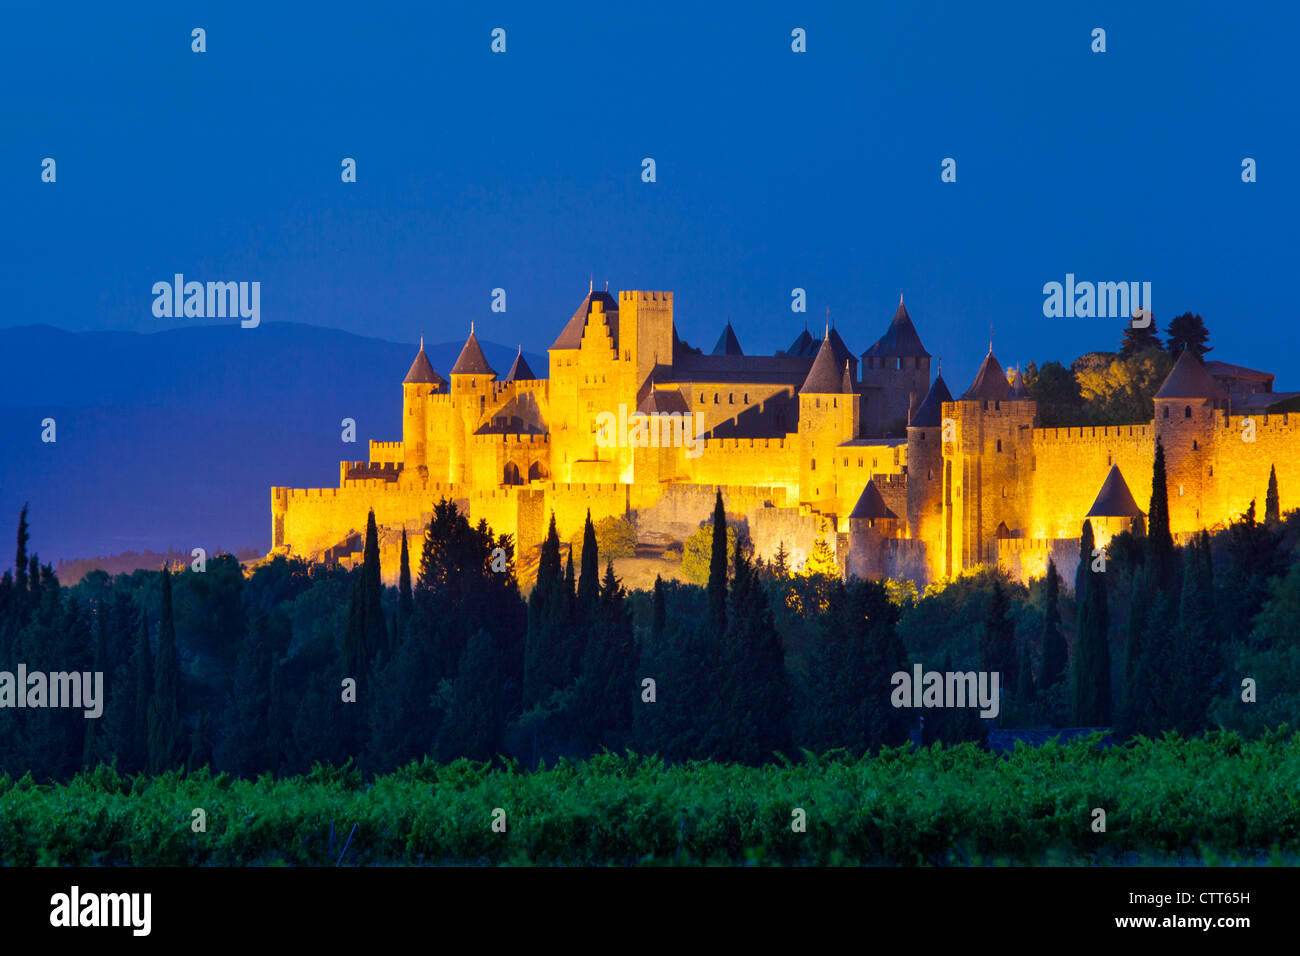 La Cite Carcassonne, Fortified Medieval town, Languedoc-Roussillon, France Stock Photo